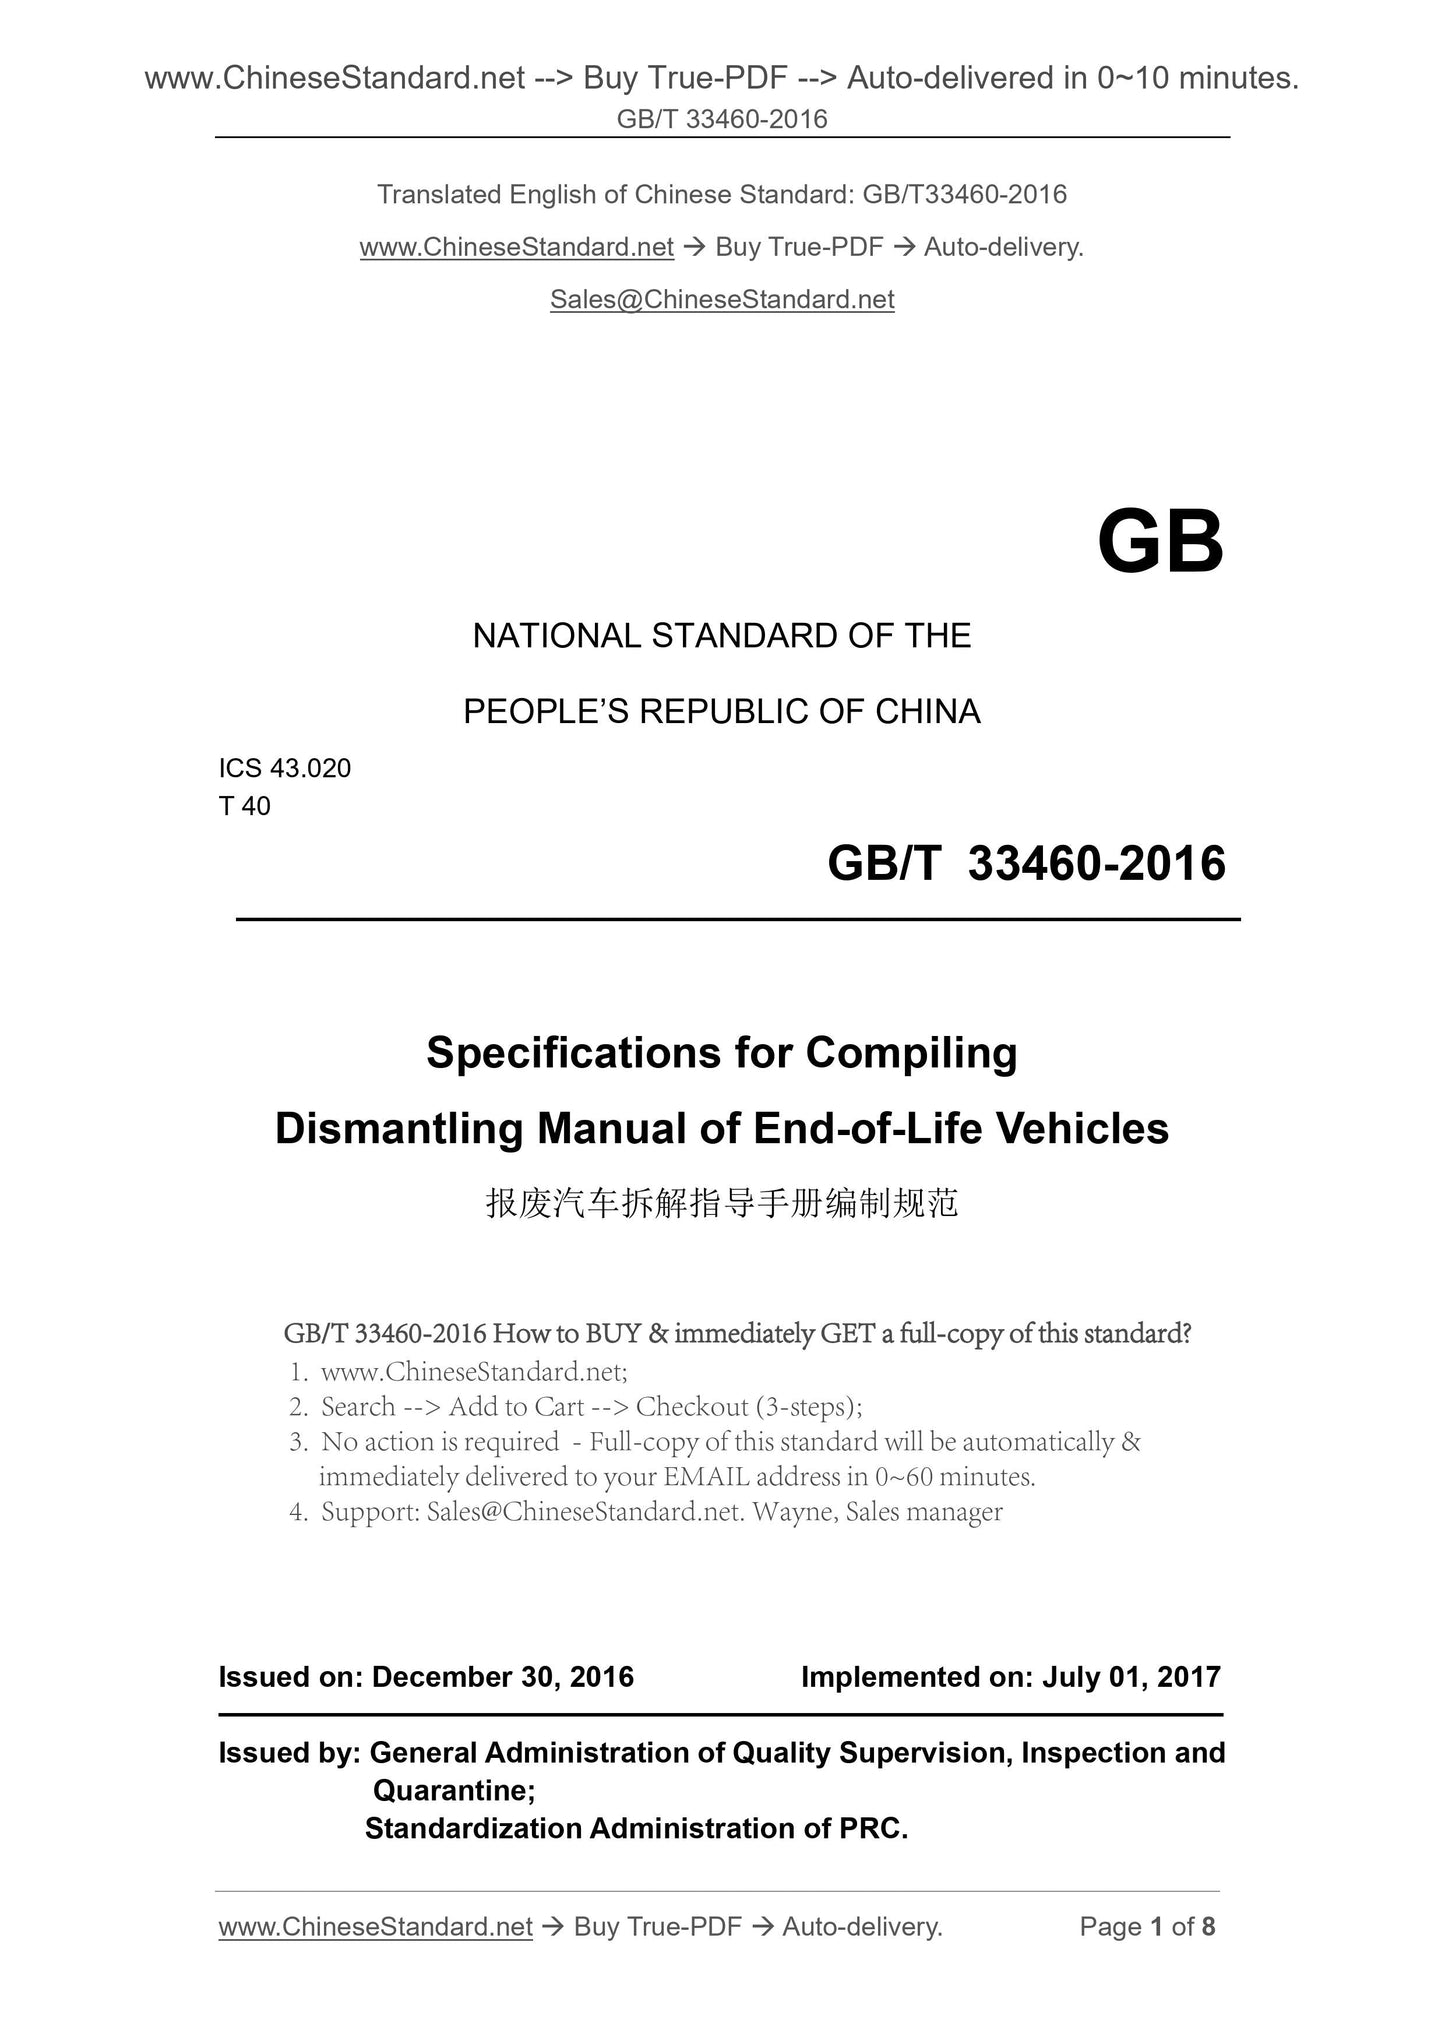 GB/T 33460-2016 Page 1